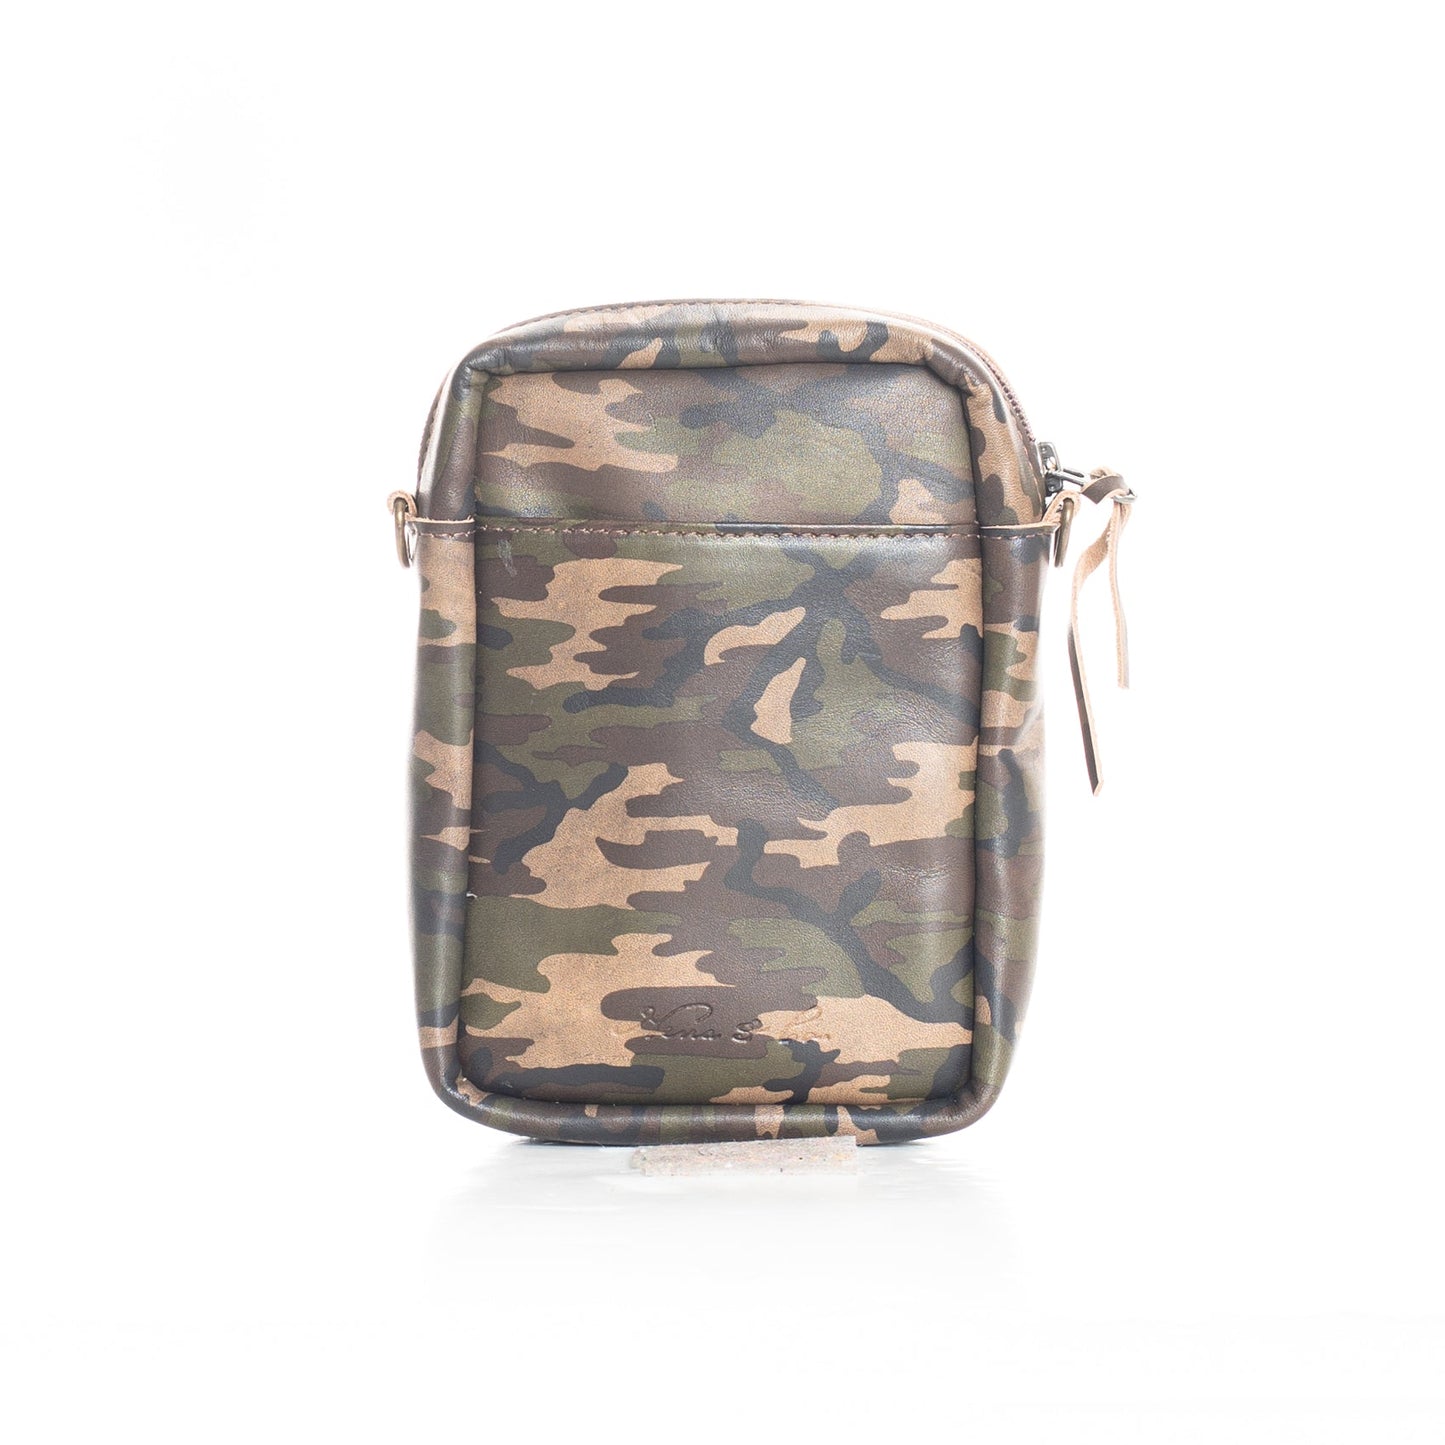 CROSSBODY TRAVEL BAG - FULL LEATHER COLLECTION - CAMOUFLAGE LEATHER